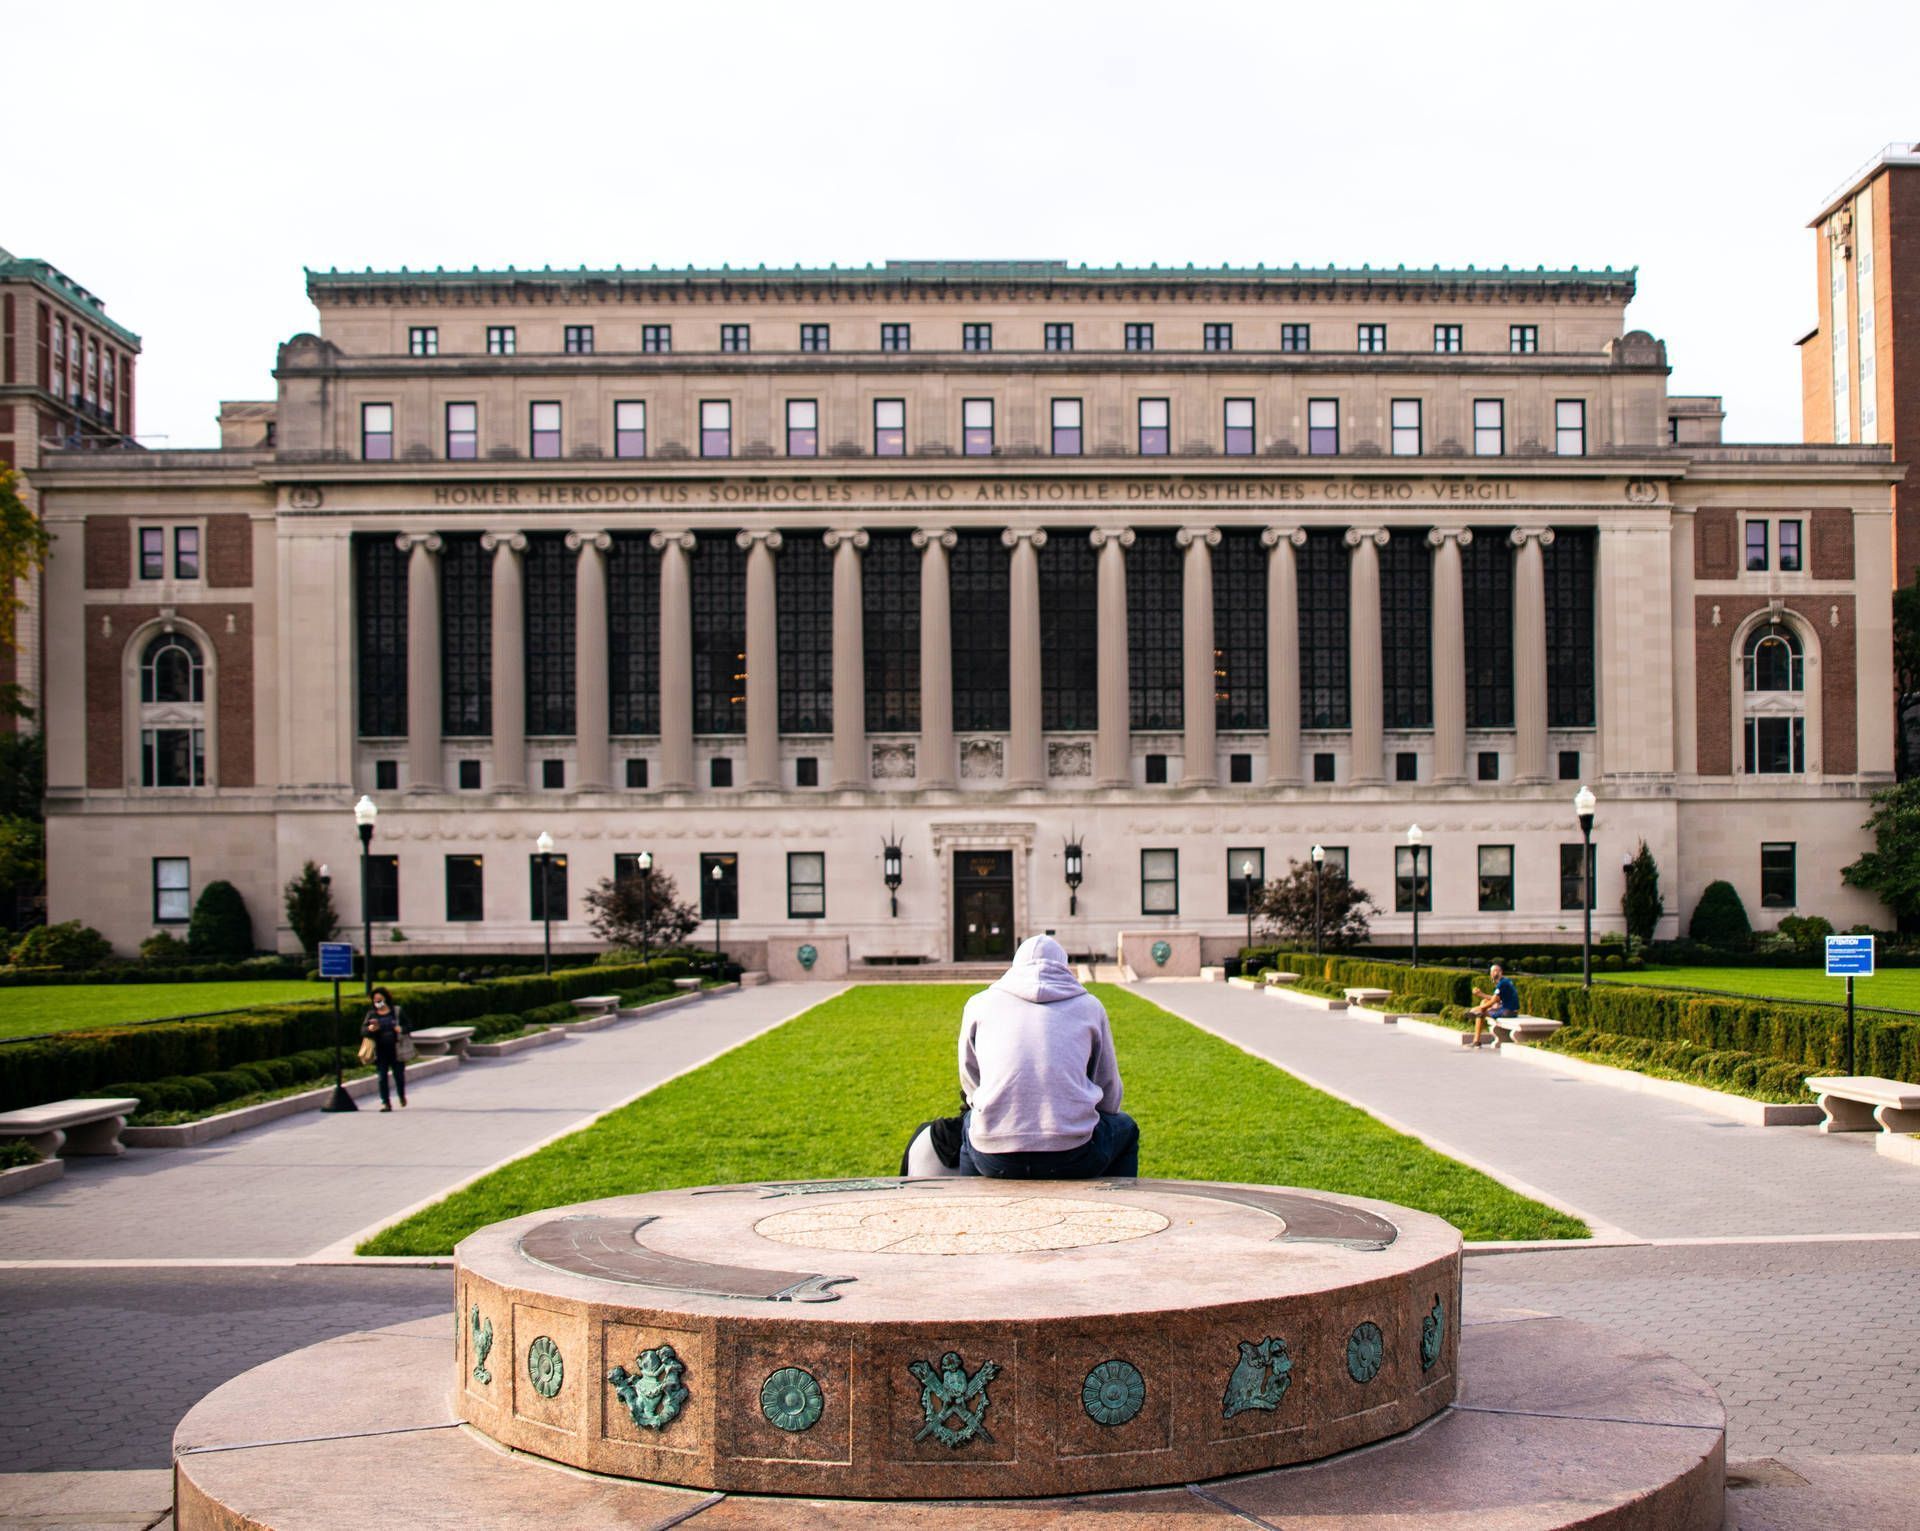 A student sits on a bench in front of a large building at Columbia University. - Columbia University